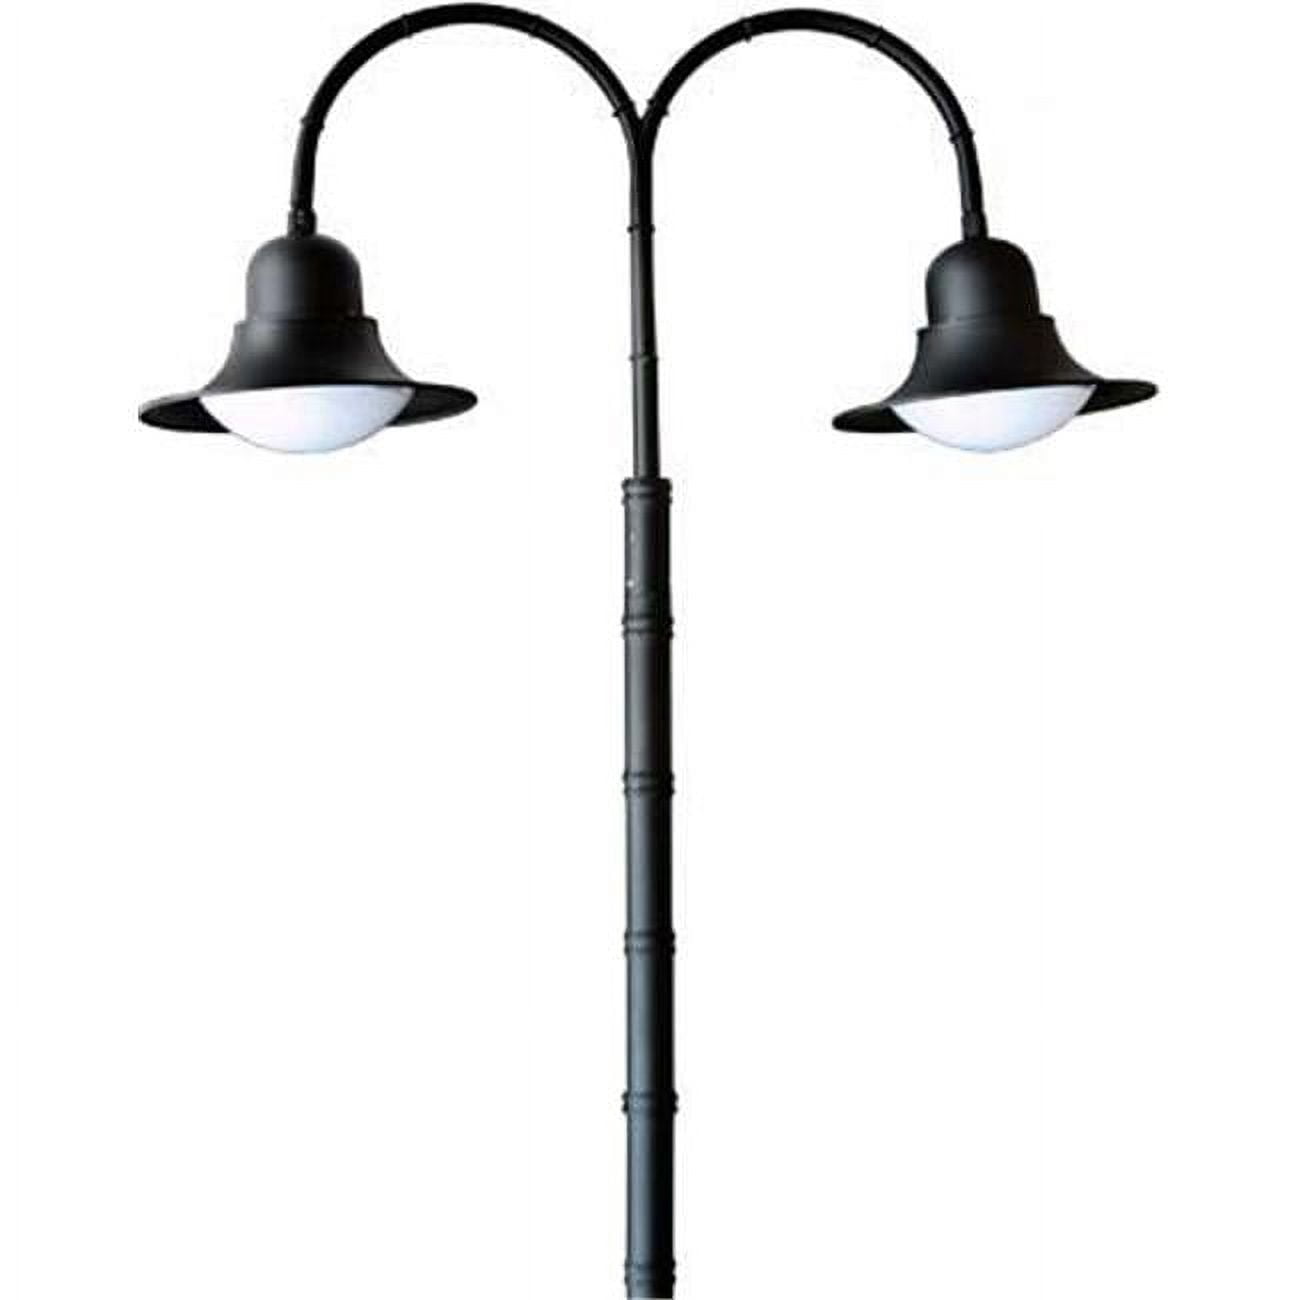 Picture of Dabmar Lighting GM625-VG 35W 120V Powder Coated Cast Aluminum Post Top Light Fixture with 2x Metal Halide Lamp, Verde Green